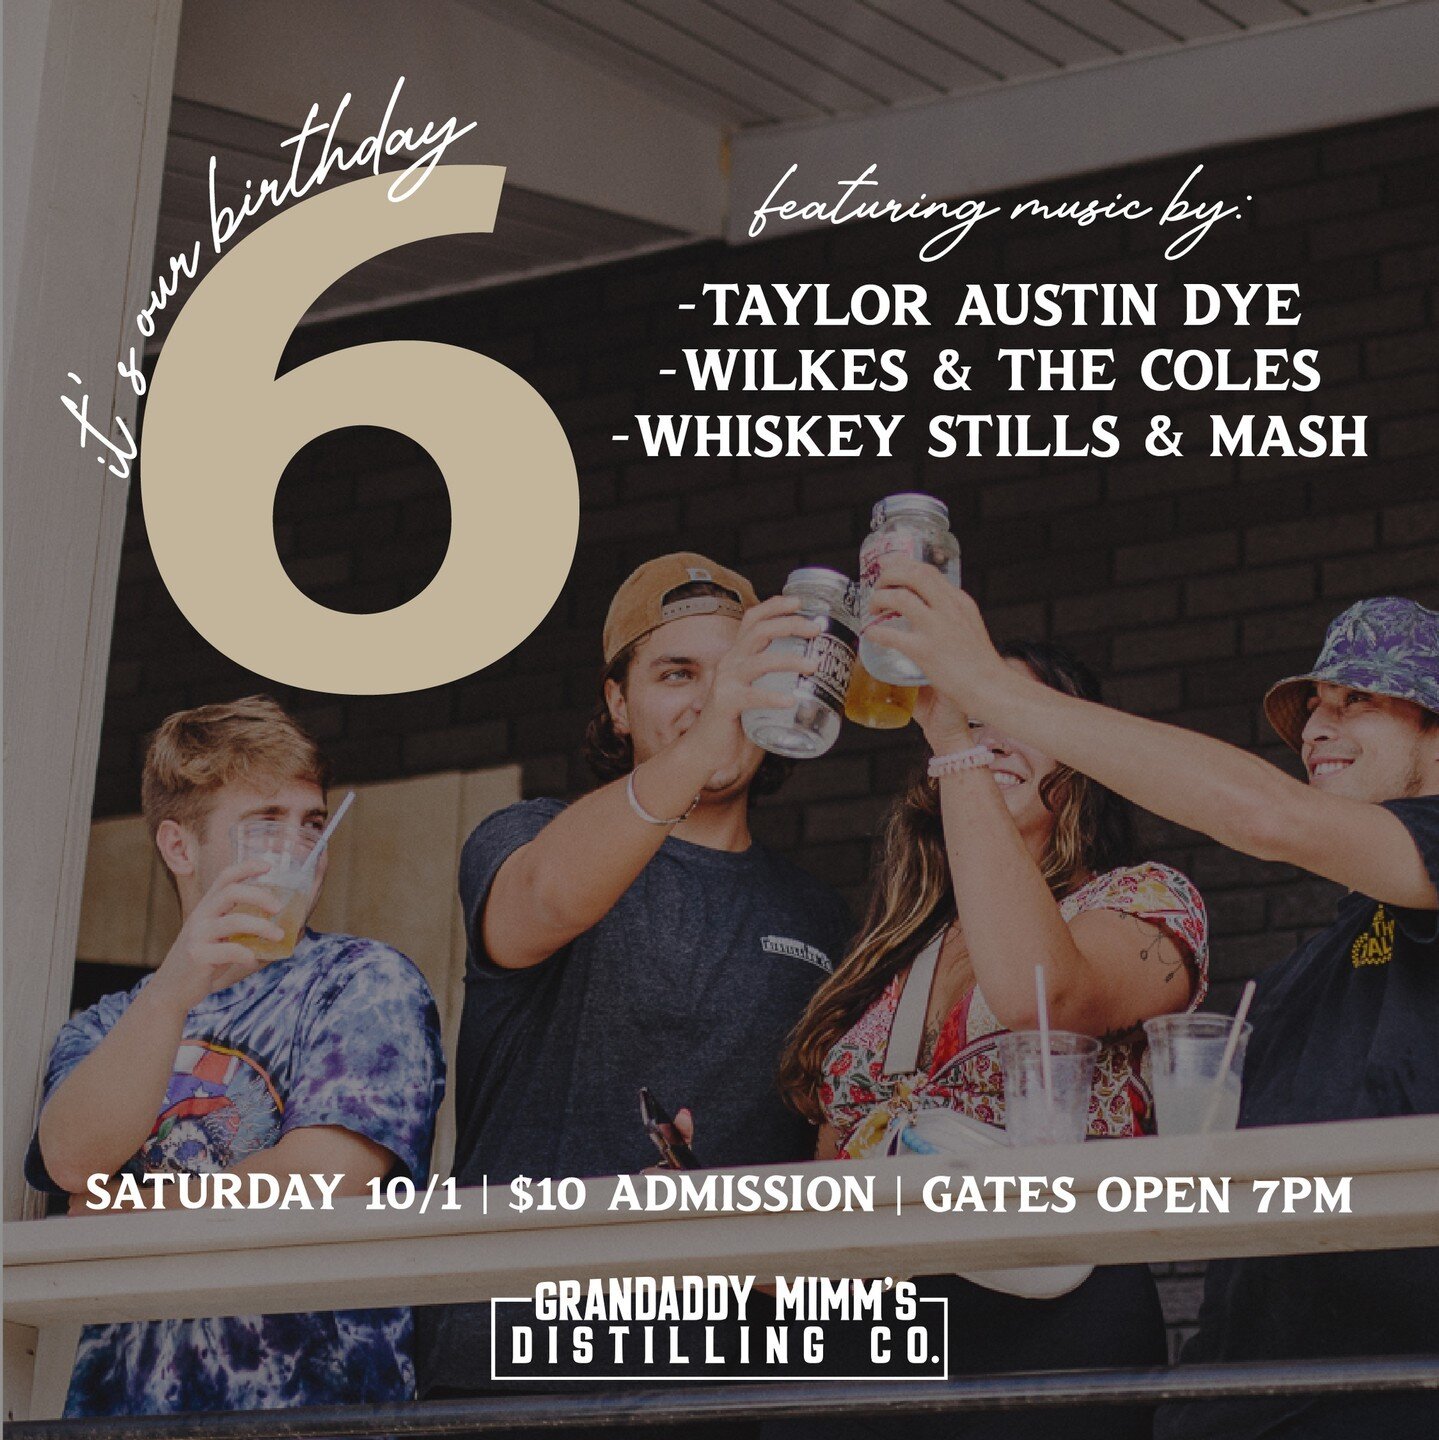 It's our birthday, y'all! And you're all invited to the party 🎉⁠
⁠
Join us at the distillery for an outdoor concert featuring @tayloraustindye, @wilkesandthecoles, and @whiskeystillsandmash! ⁠
⁠
The party comes complete with @blairsvillerestaurant f